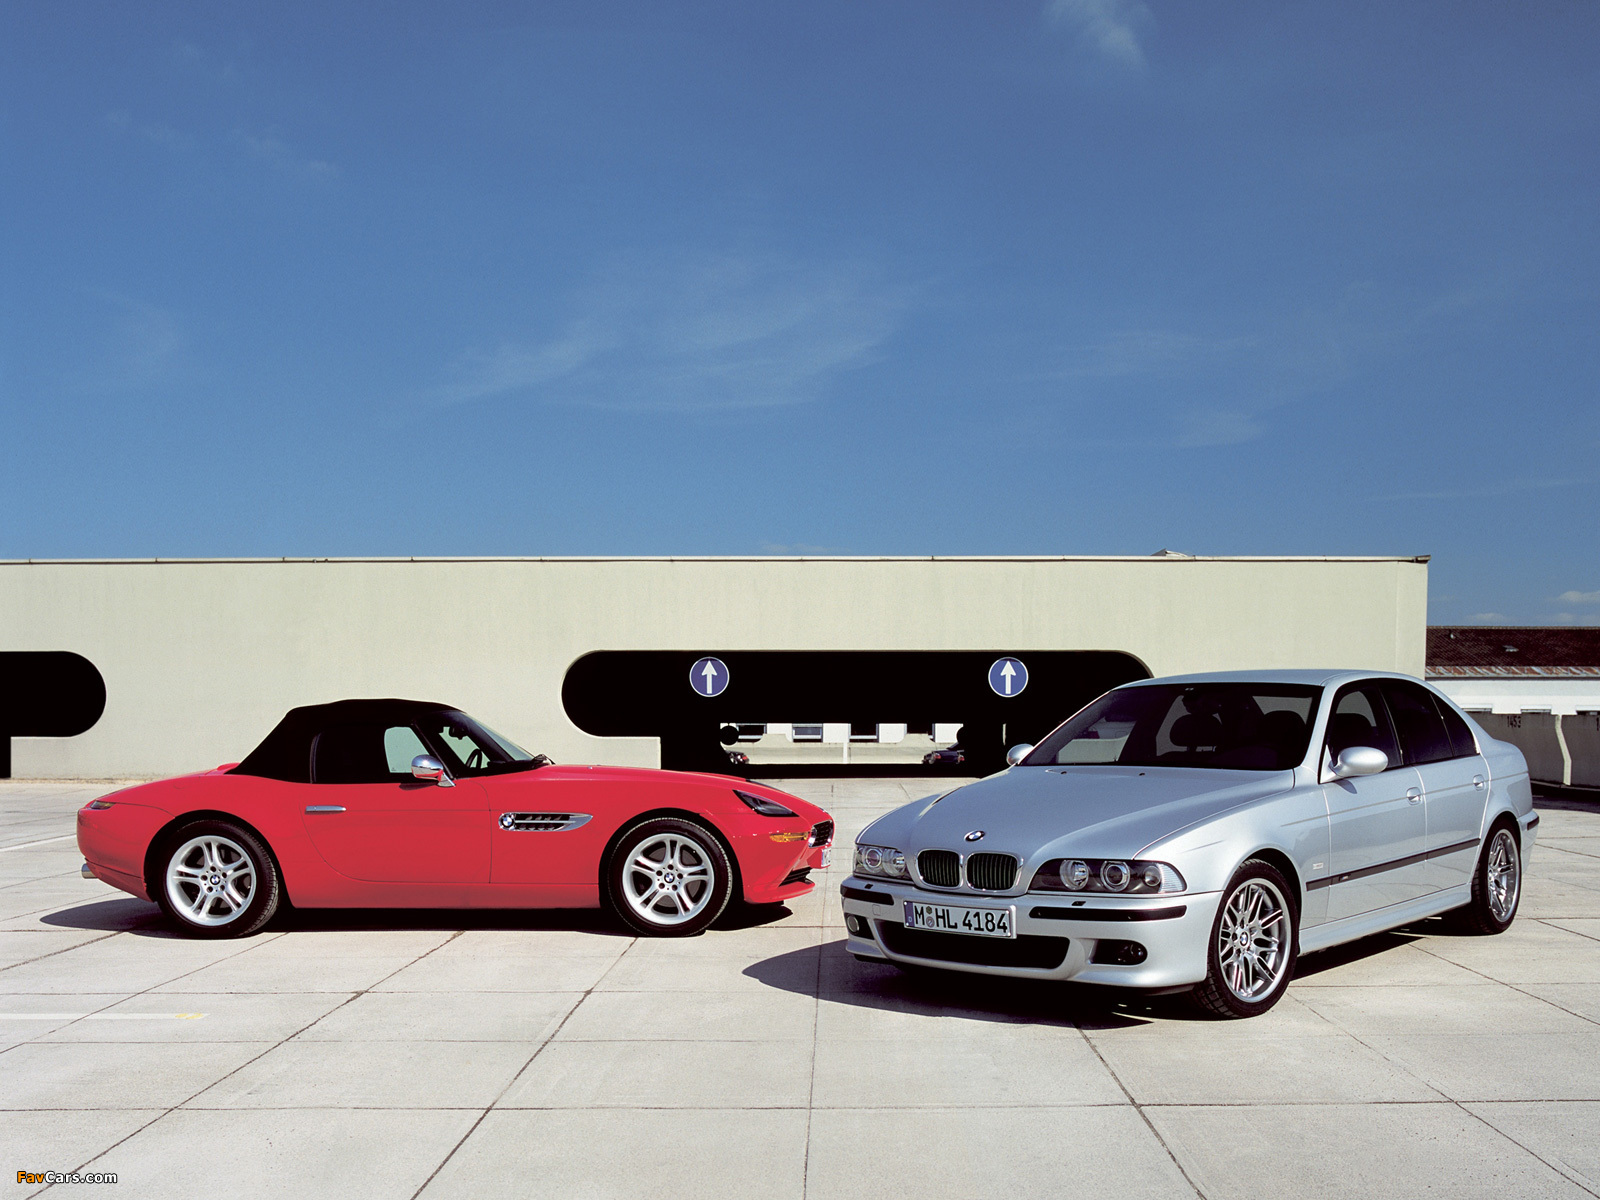 Images of BMW (1600 x 1200)